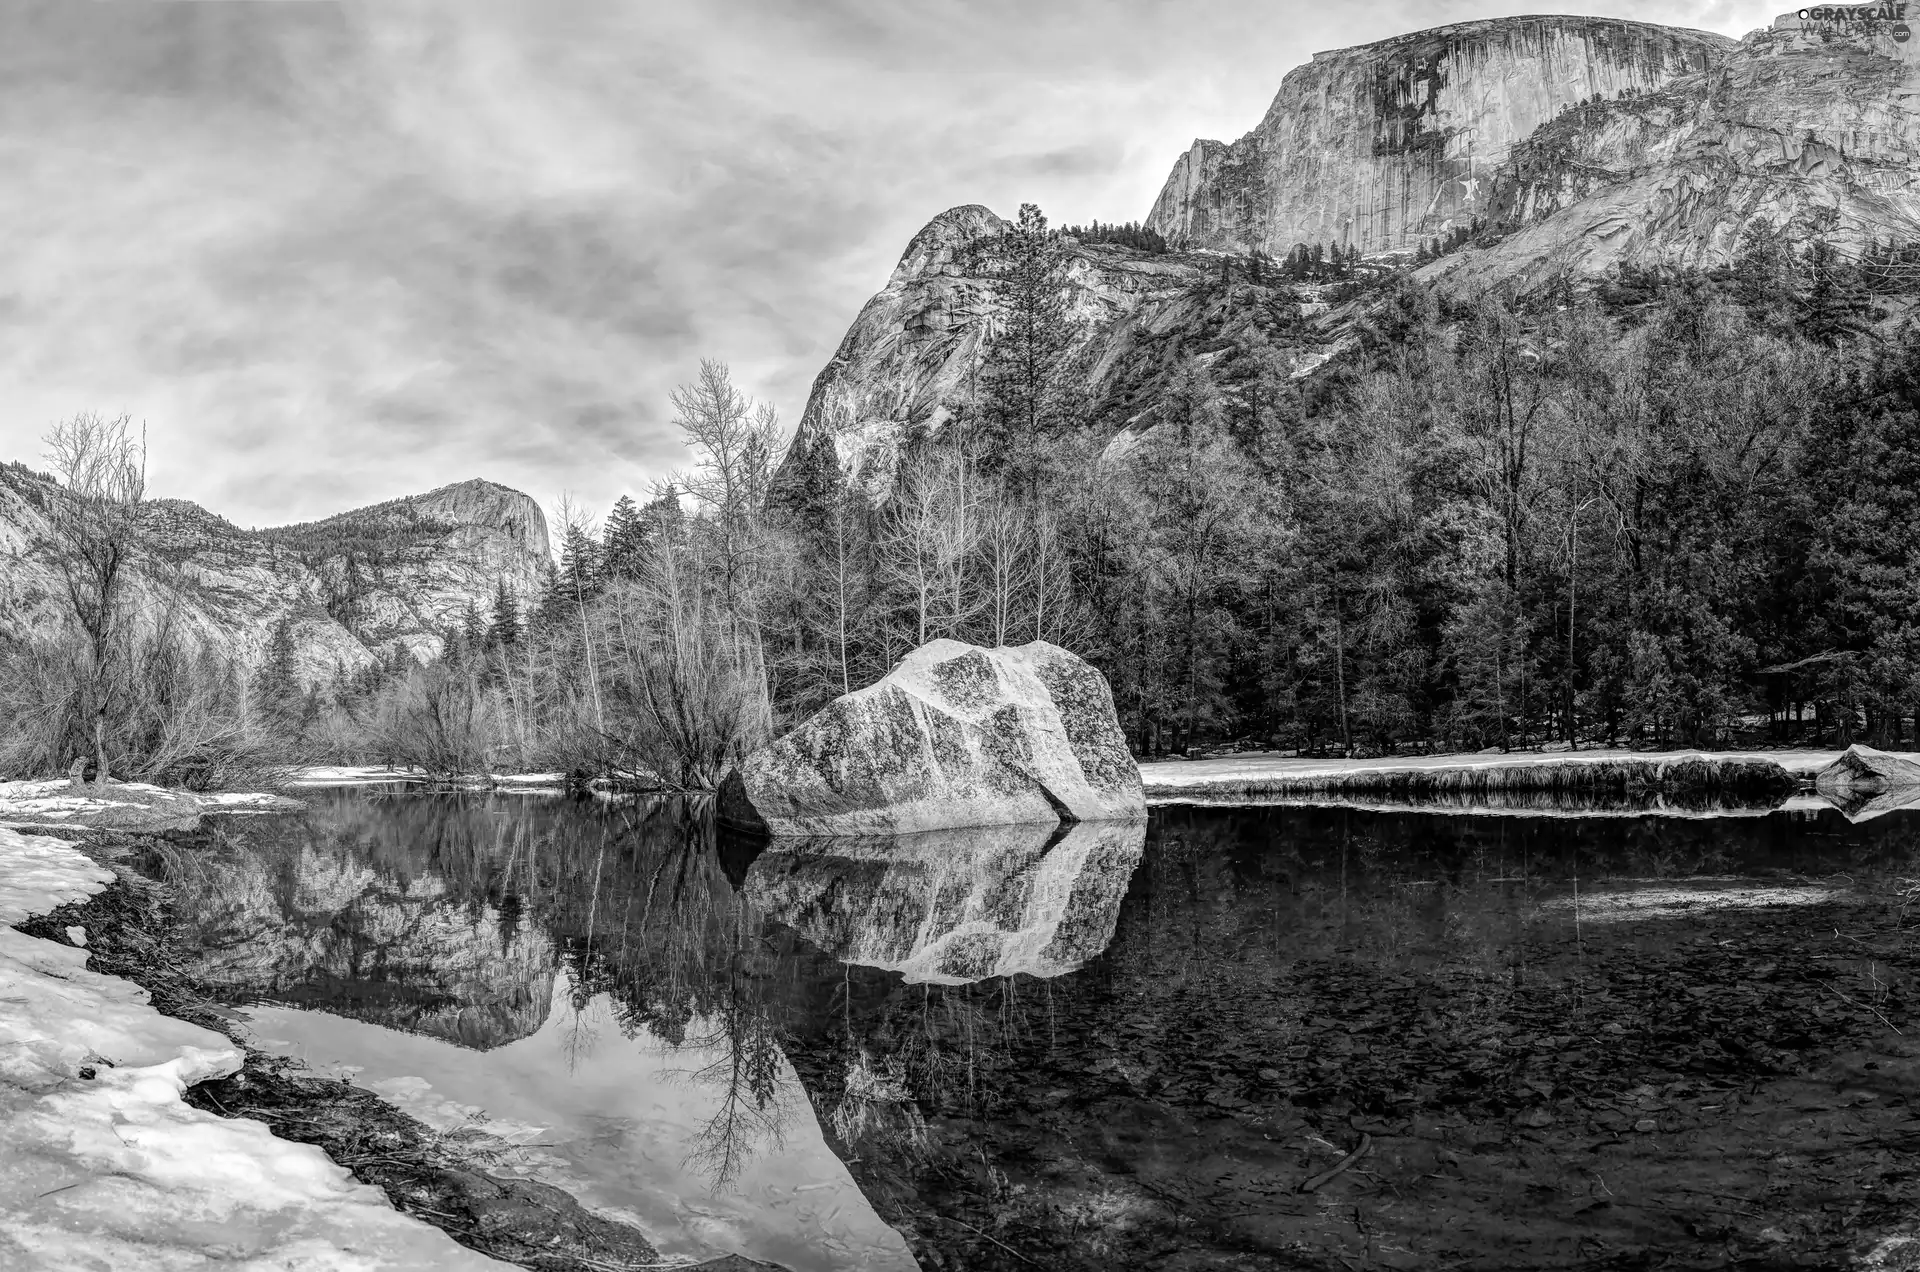 Yosemite National Park, The United States, forest, River, Mountains, State of California